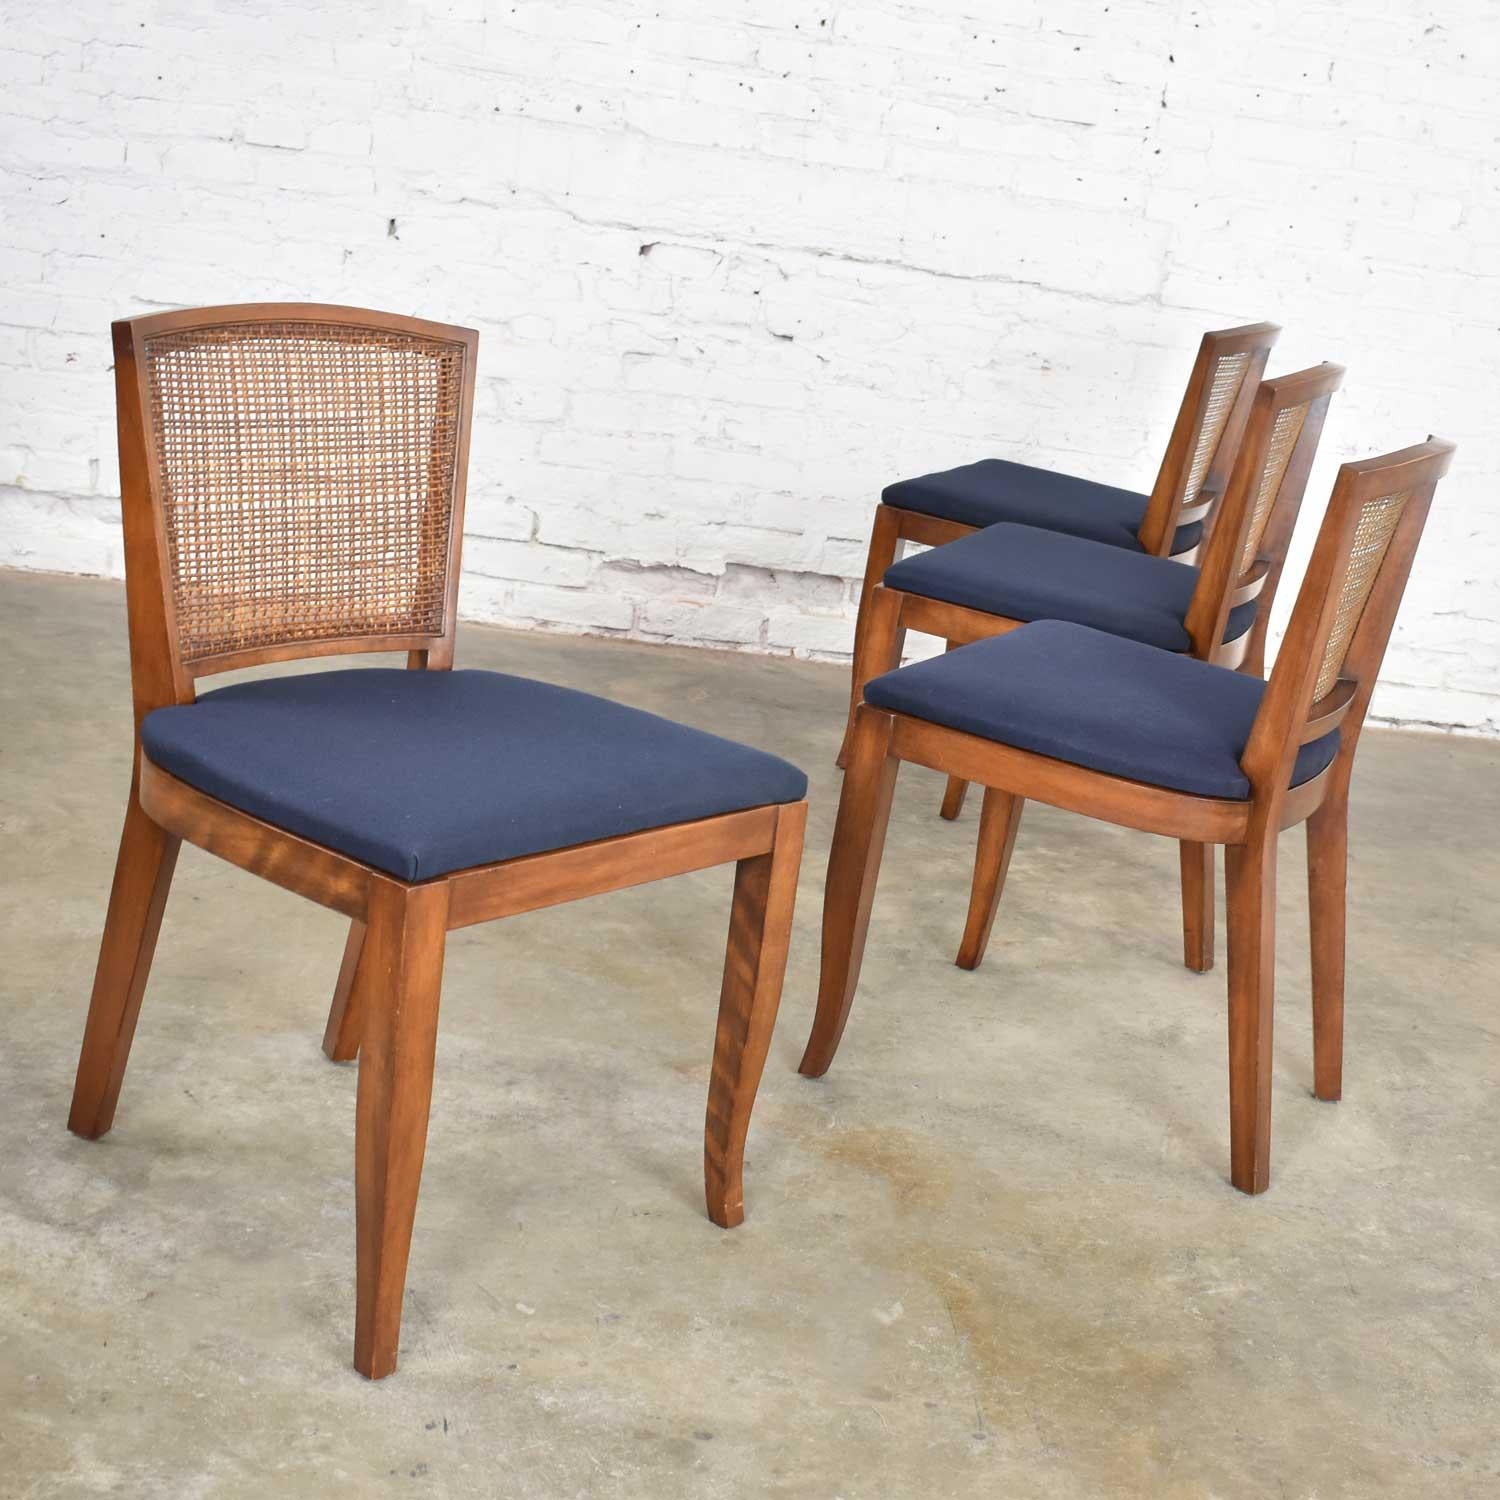 Handsome set of 4 Mid-Century Modern dining chairs with cane backs and newly upholstered seats. They are in wonderful vintage condition. One chair has a small repair to the caning, but you must search to find it. The seats have a new black/dark navy